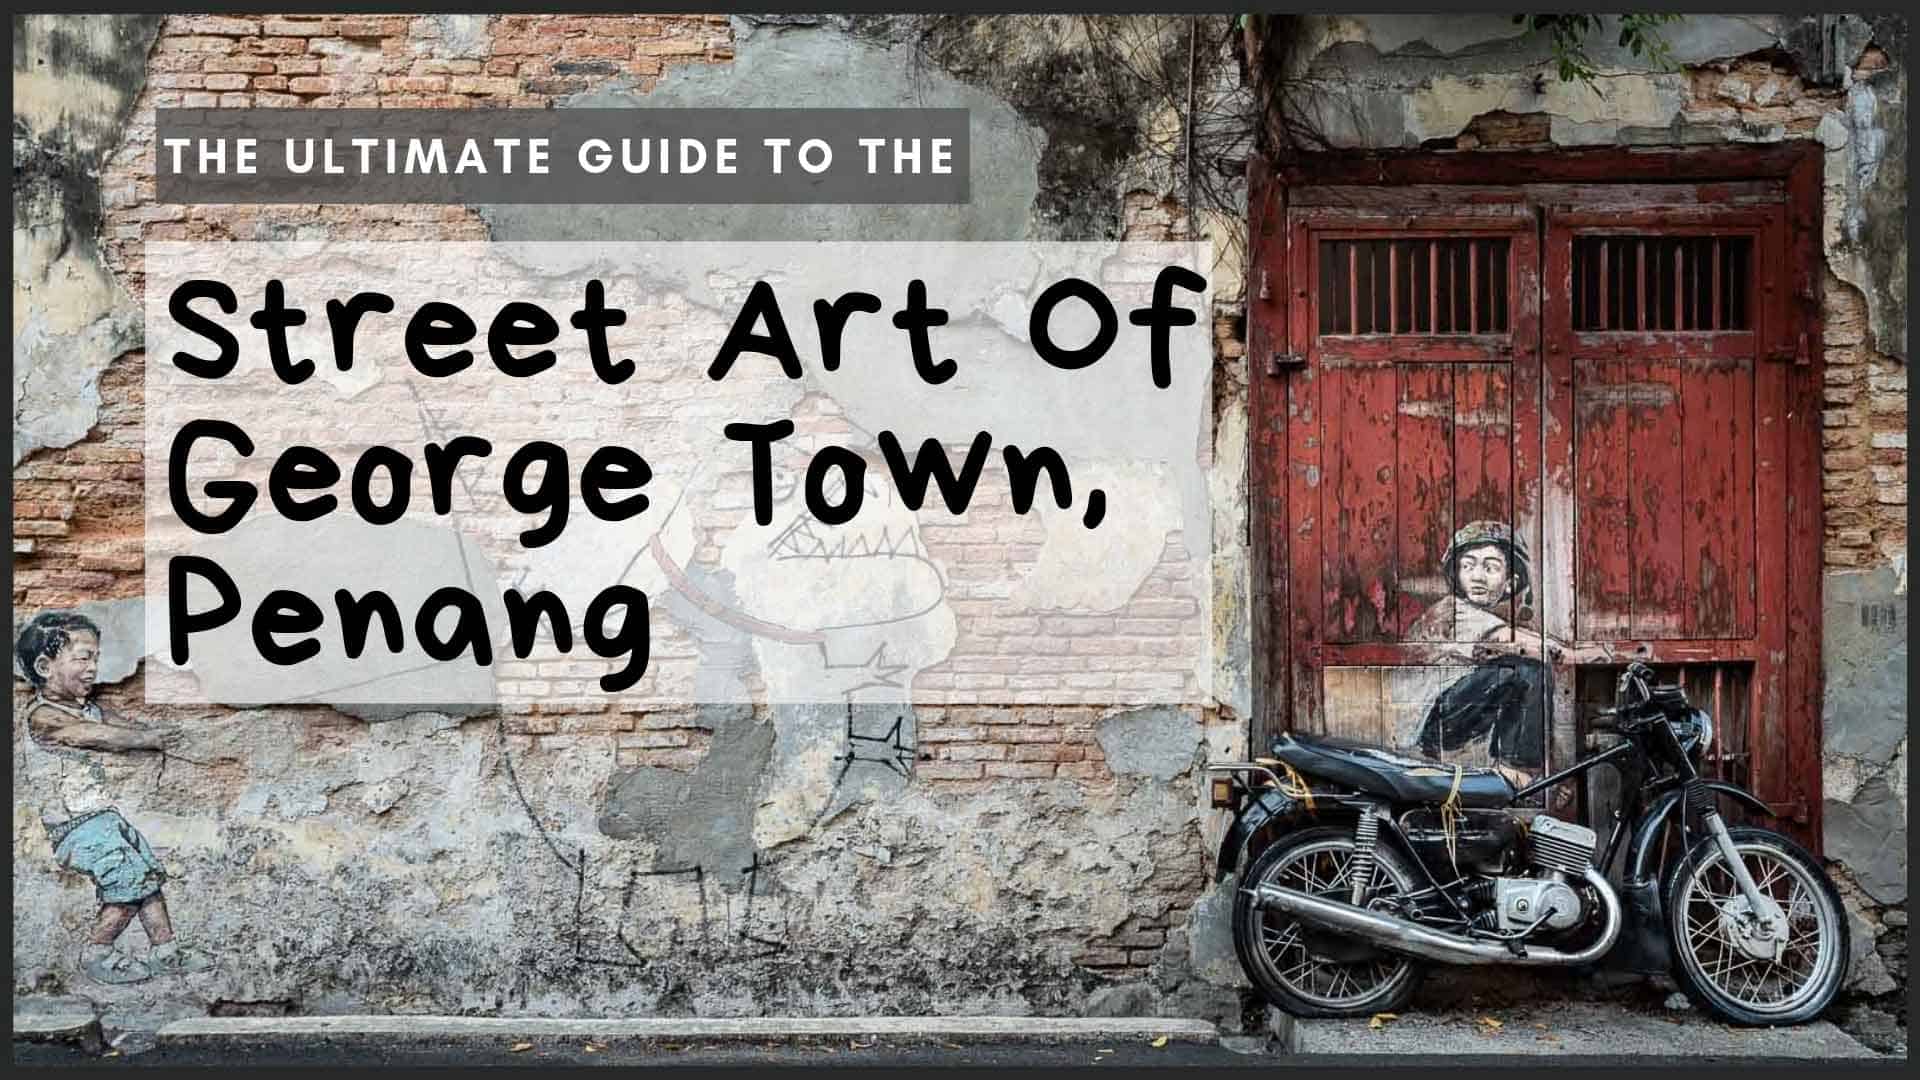 The Ultimate Guide To The Street Art Of George Town, - Street Art George Town Penang - HD Wallpaper 